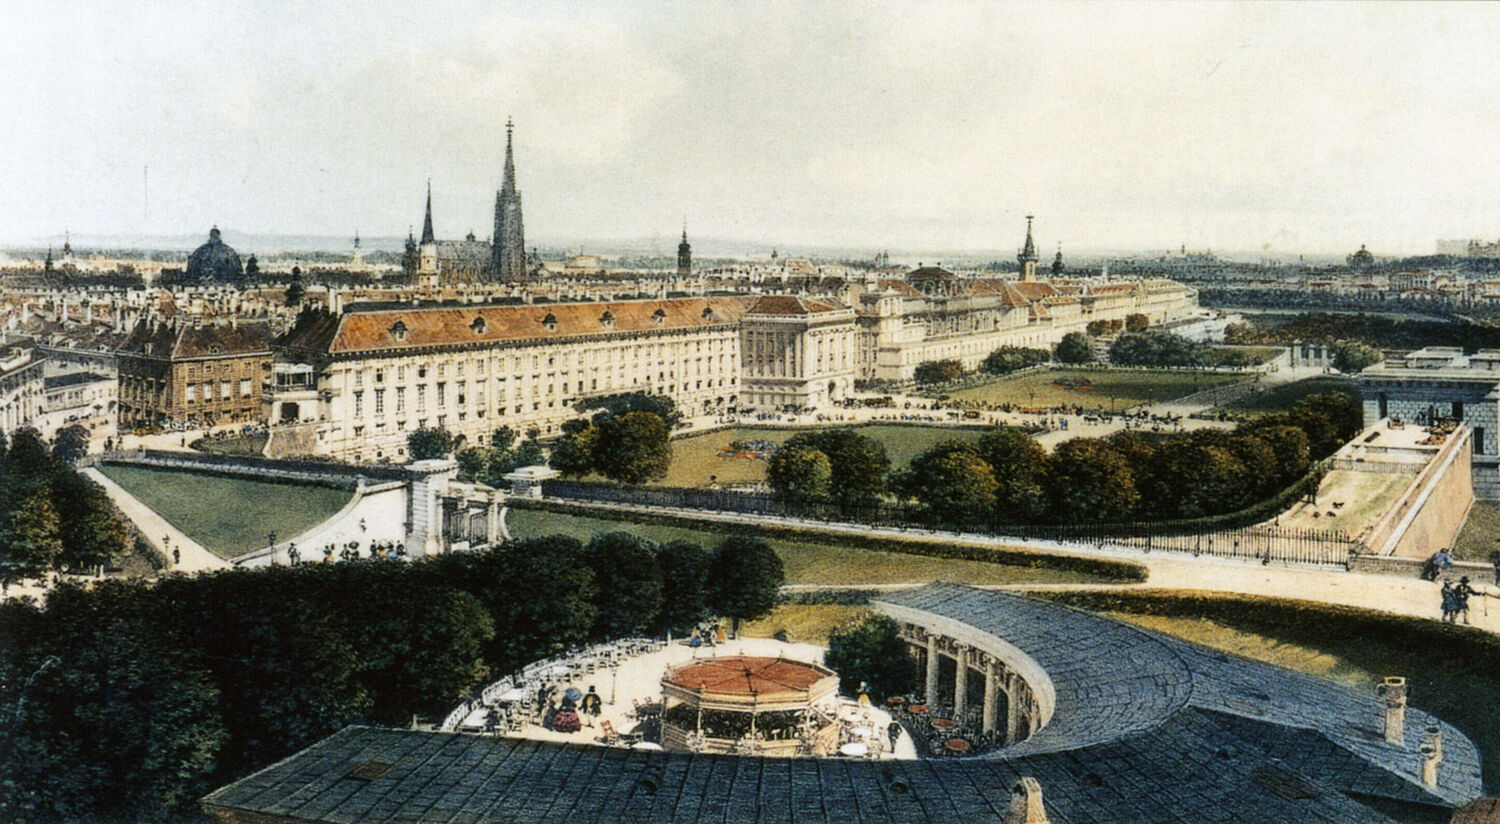 The Vienna Imperial Palace